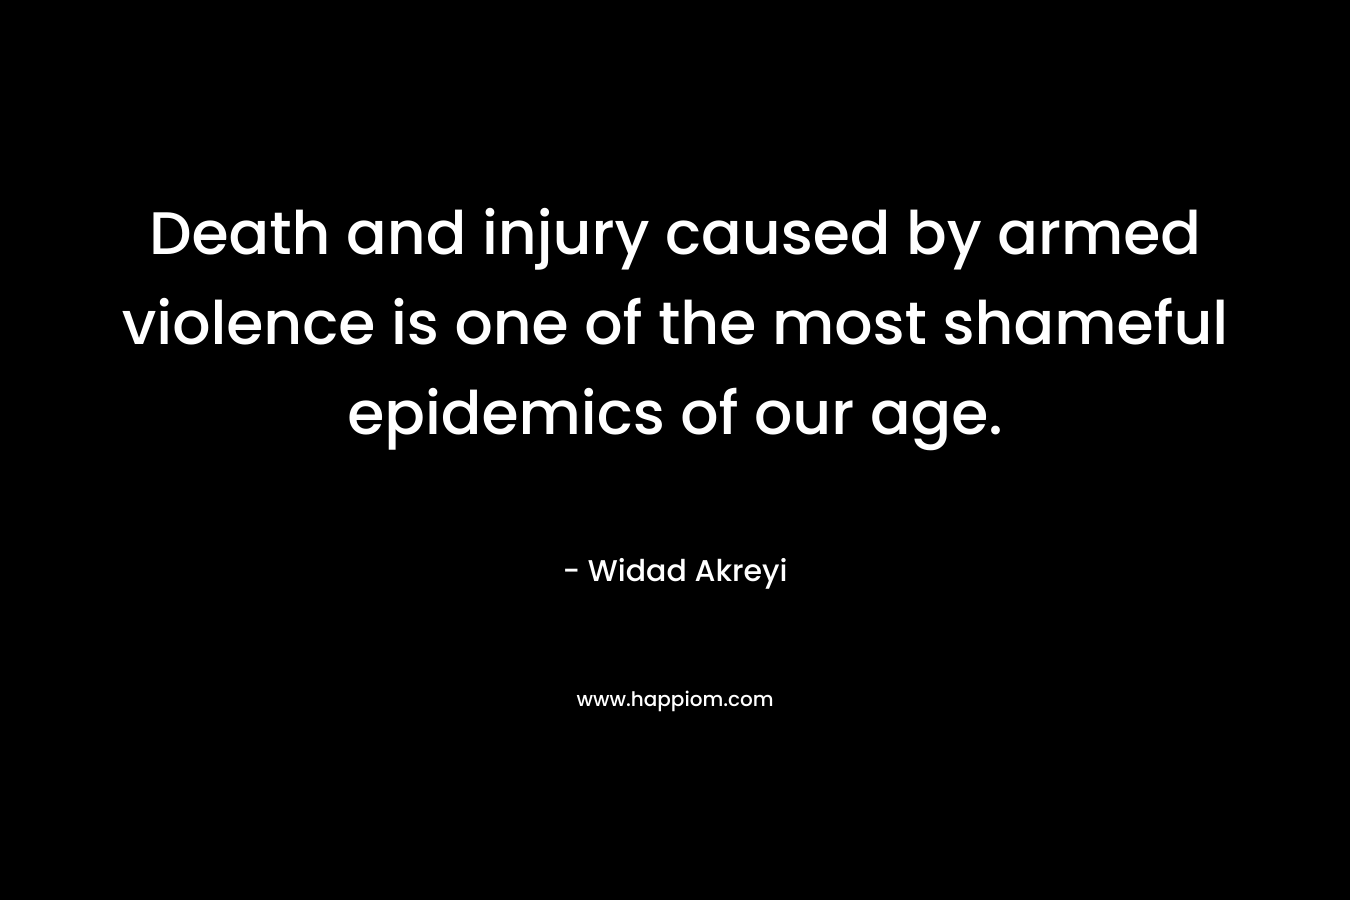 Death and injury caused by armed violence is one of the most shameful epidemics of our age.